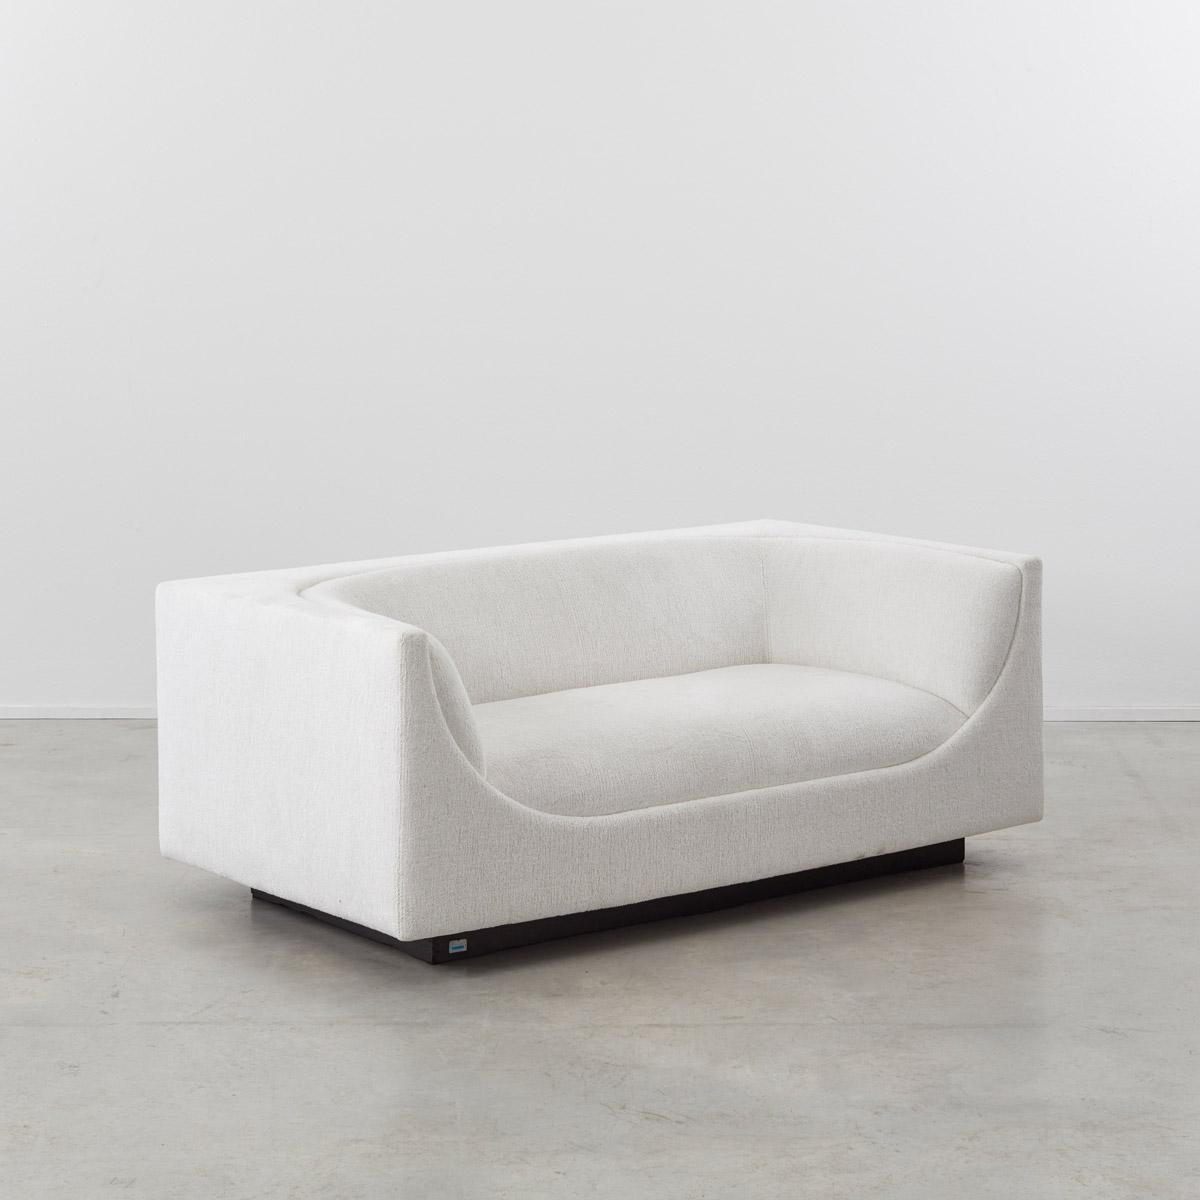 This 1970s Cubo sofa takes a cuboid form and scoops out its core. It was designed by Jorge Zalszupin, a Polish architect who moved to Brazil, having been inspired by the works of Brazilians Oscar Niemeyer and Roberto Burle Marx. Post World War II